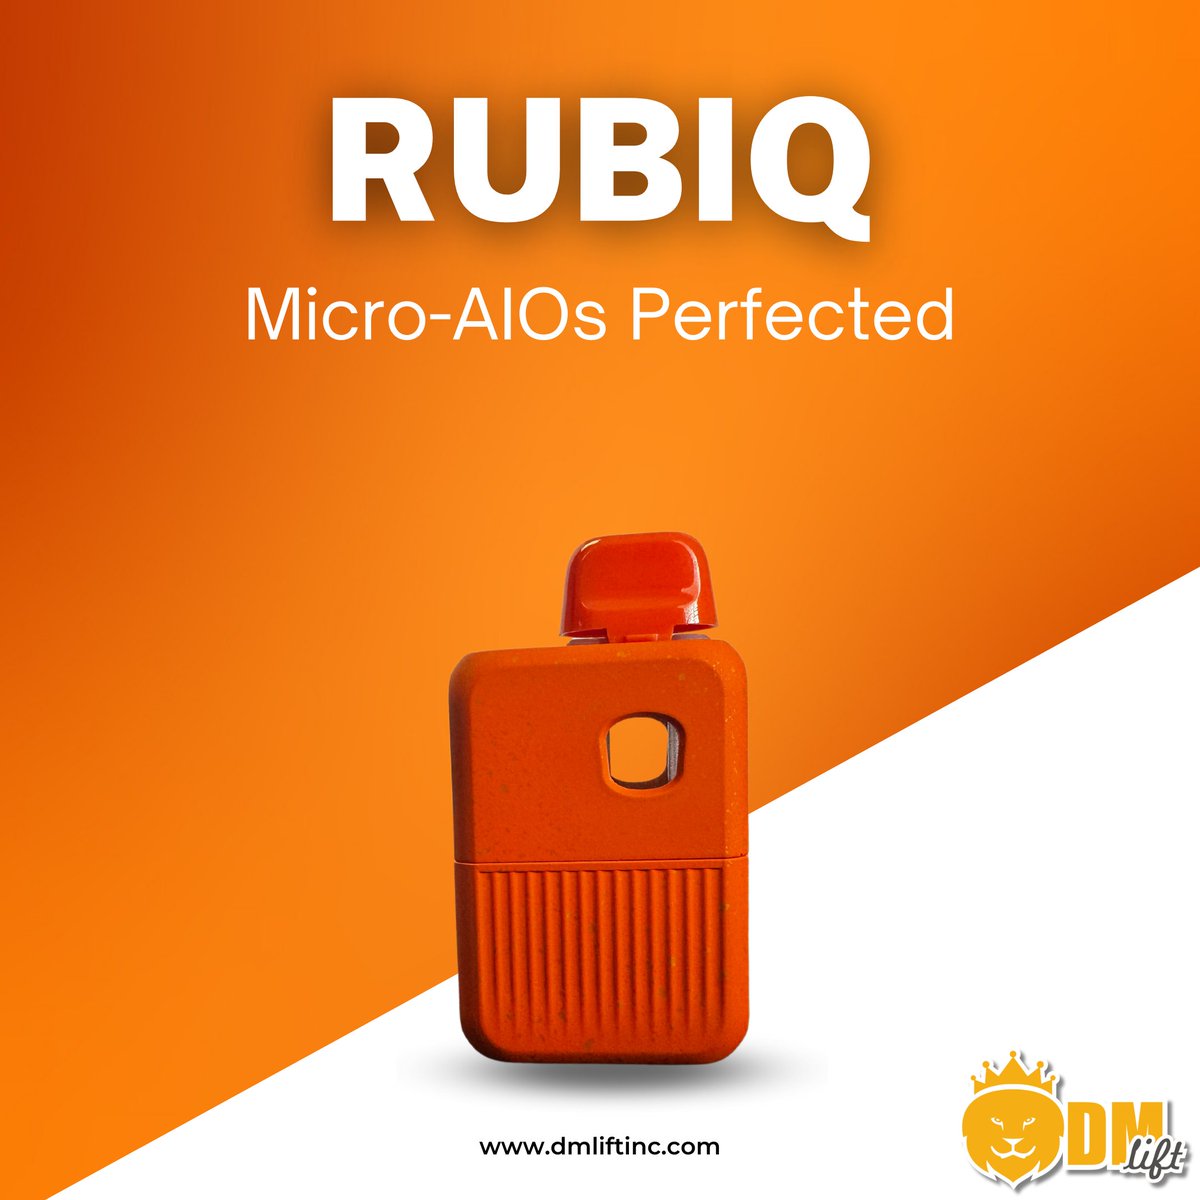 You know what they say... “Good things come in small packages”

Introducing: Rubiq

bit.ly/3RHfmL2

#DMLift #MicroAIO #smallpackages #vape #B2B #cannabiscommunity #cannabisindustry #cannabisbusiness #cannabissociety #cannabis #THCextracts #THCoil #vapepod #cannabisoil